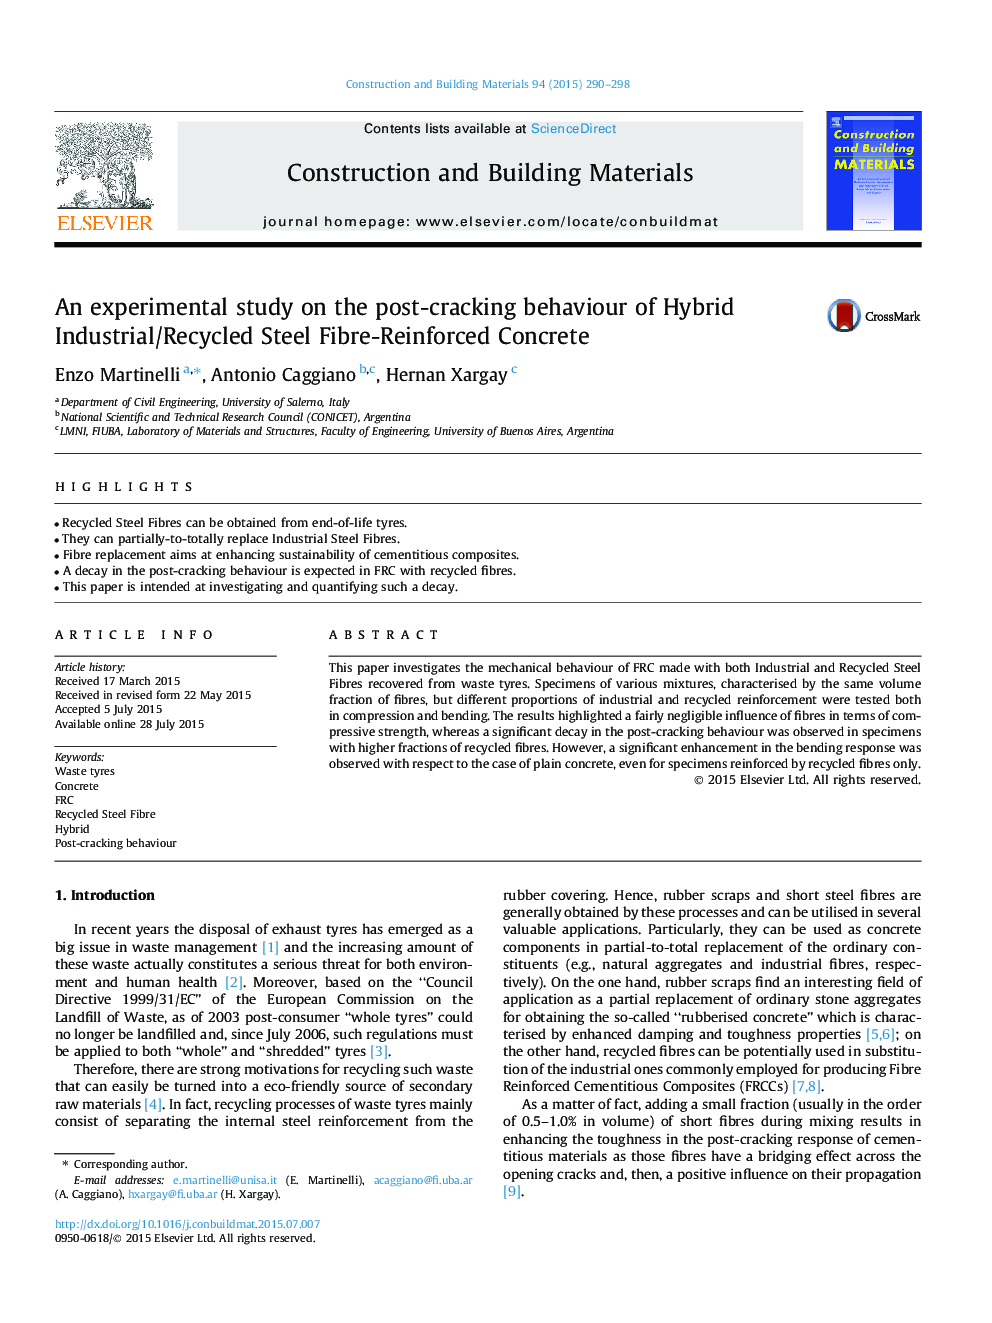 An experimental study on the post-cracking behaviour of Hybrid Industrial/Recycled Steel Fibre-Reinforced Concrete